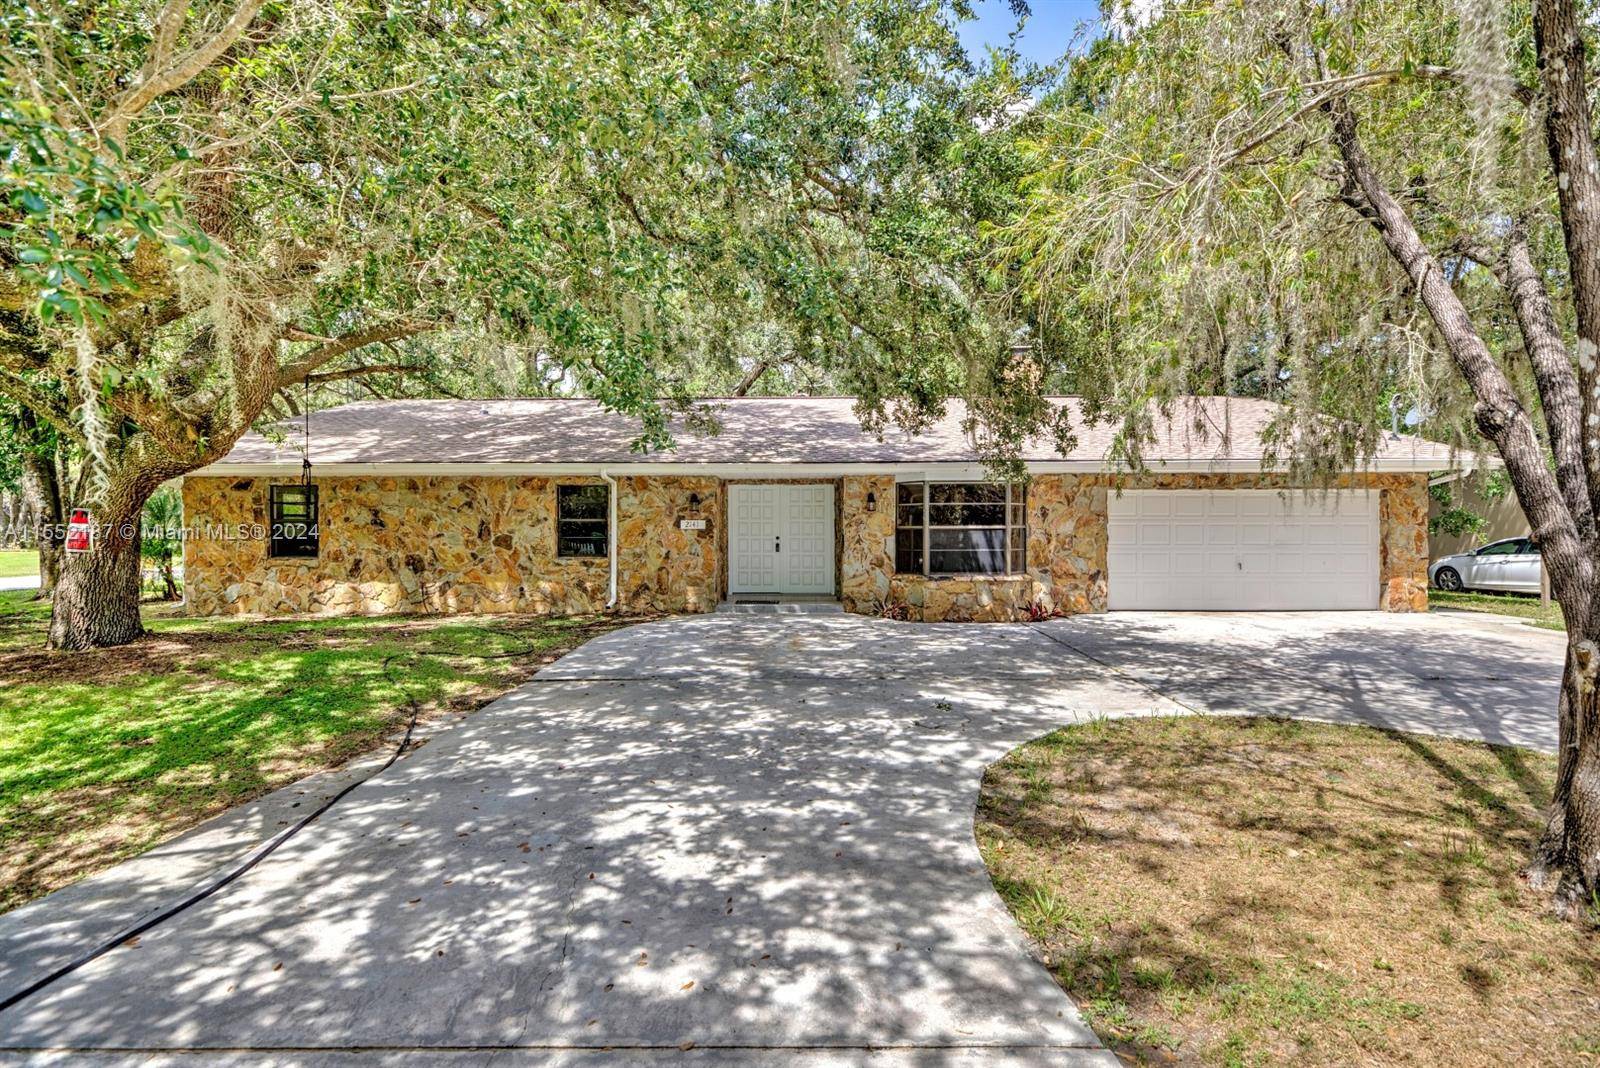 A spacious corner lot surrounded by mature trees on a lush Oak Canopied Tree Lined Street.